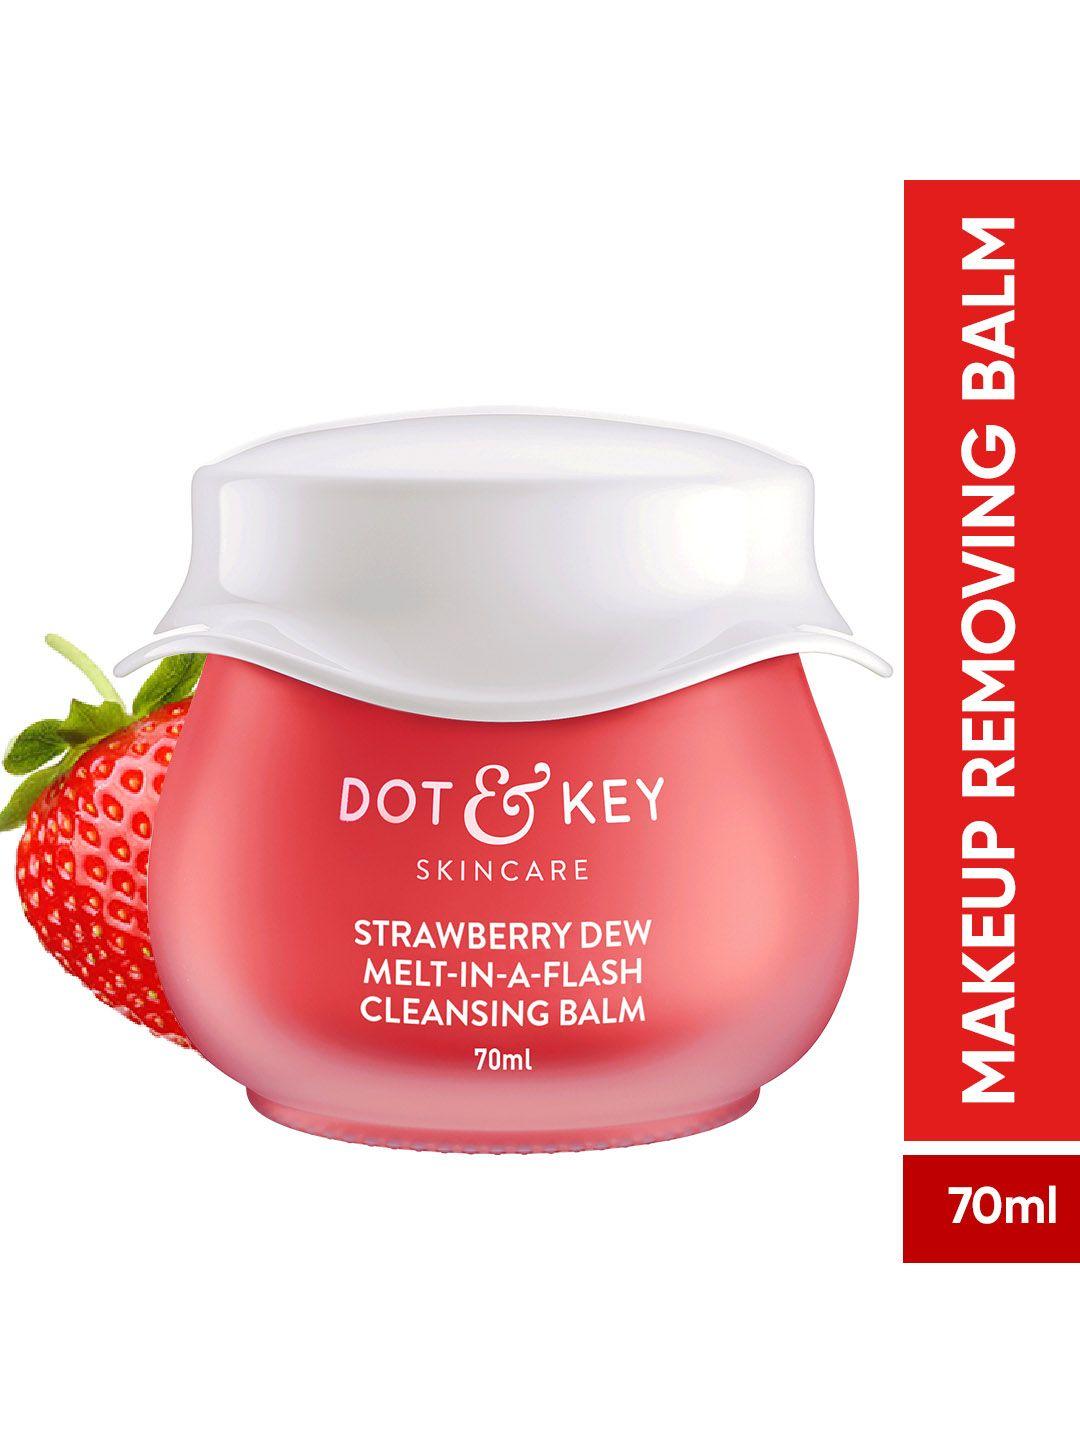 dot & key strawberry dew melt-in-a-flash cleansing makeup remover balm - 70 ml